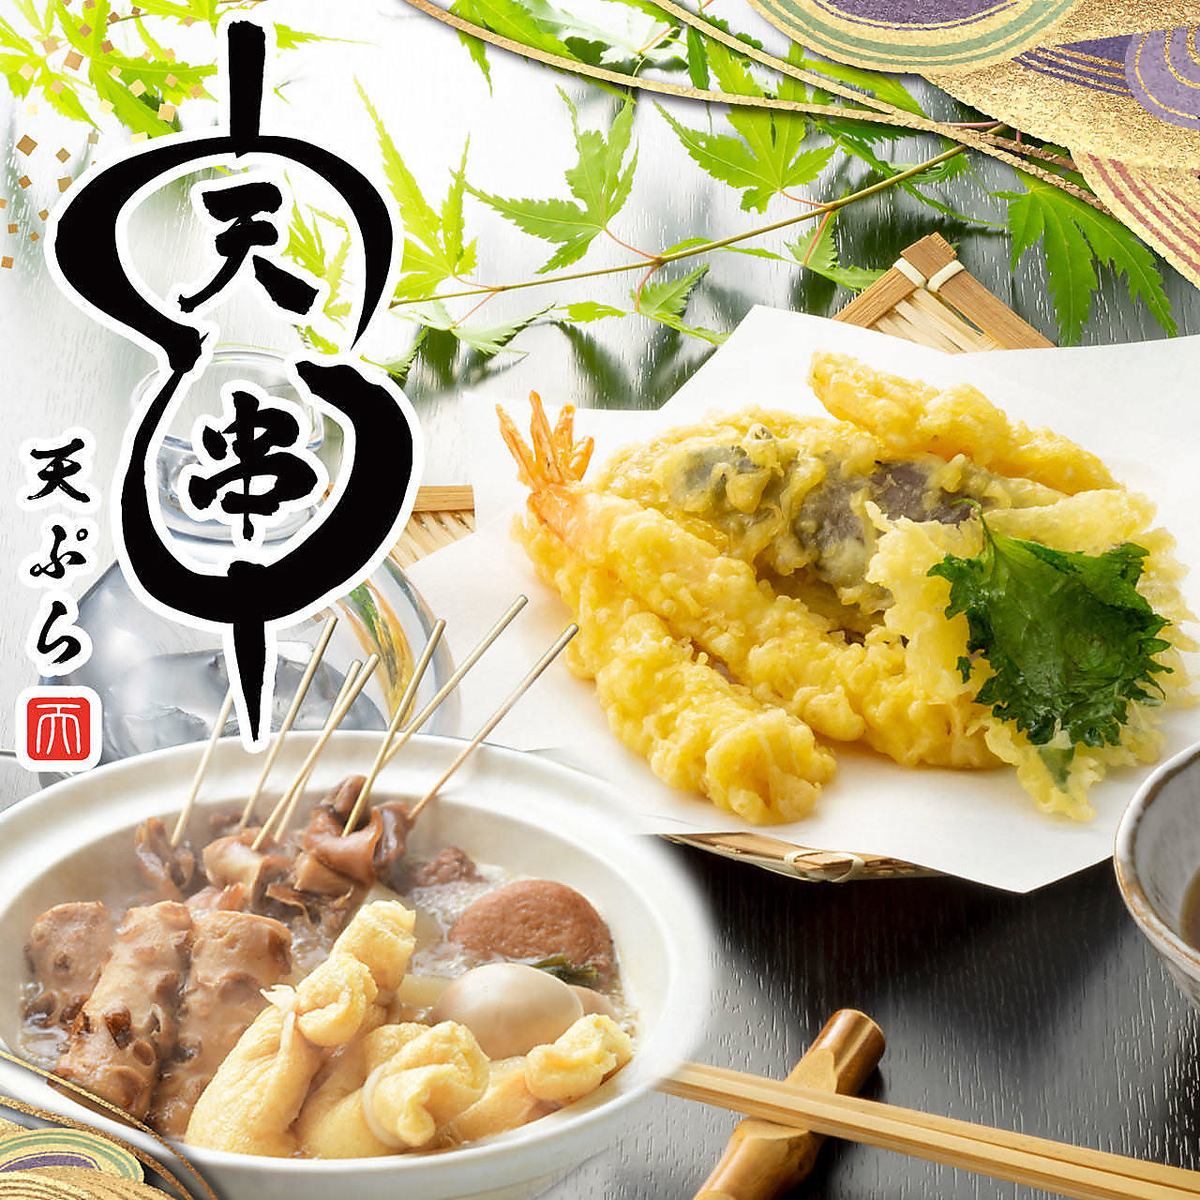 New opening on December 5th! 1 minute walk from the west exit of Iwakura Station ◆ A restaurant where you can enjoy authentic skewered tempura and creative Japanese cuisine